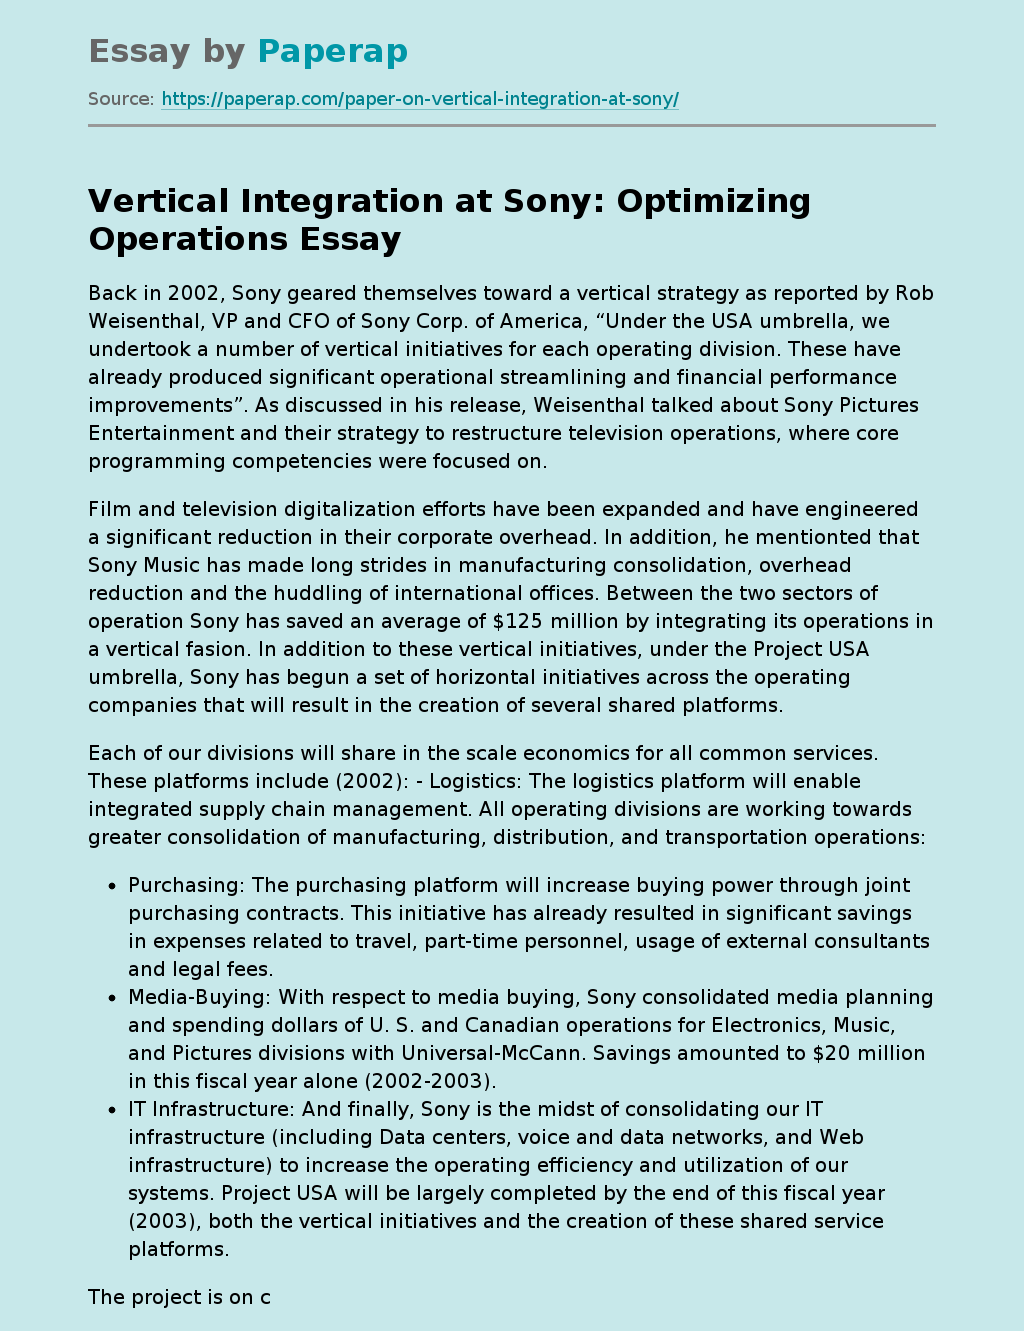 Vertical Integration at Sony: Optimizing Operations